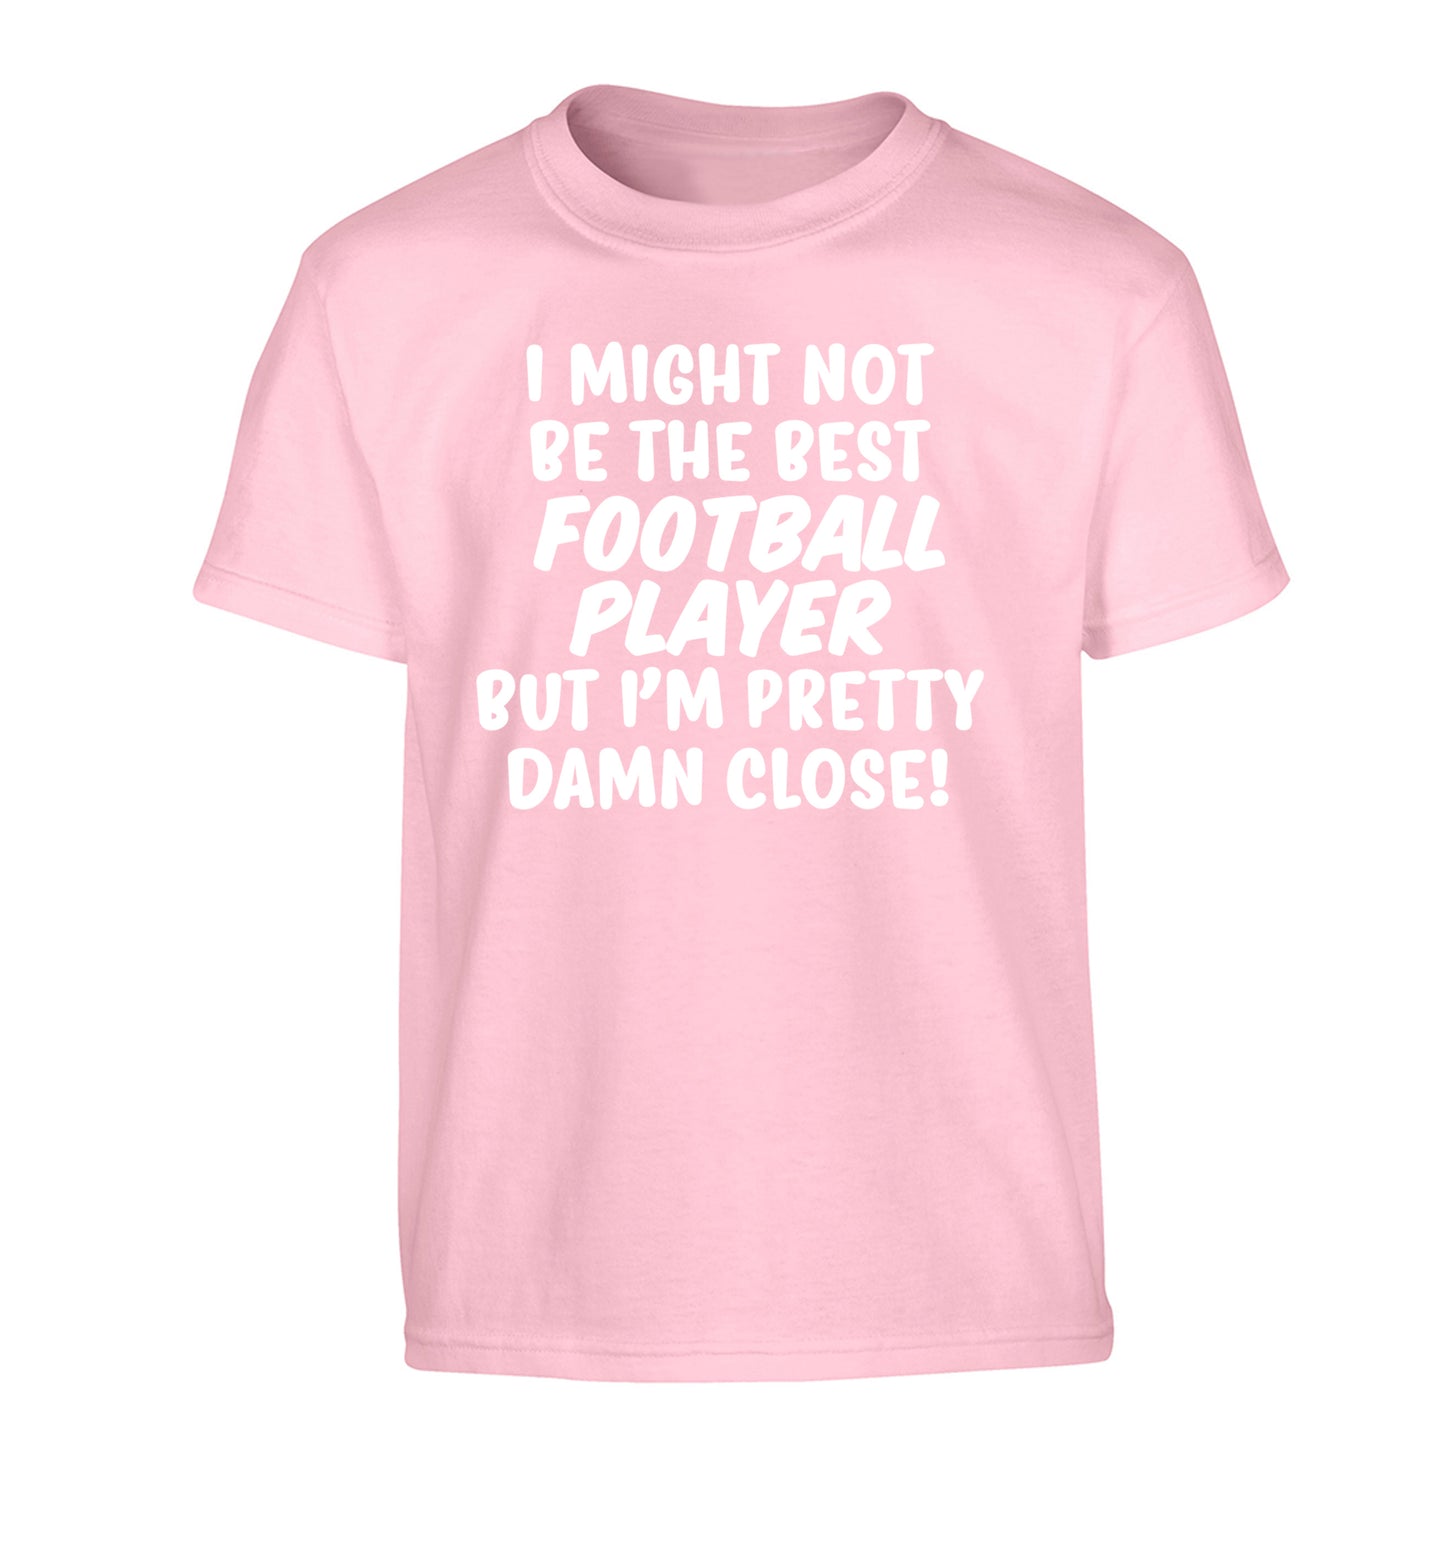 I might not be the best football player but I'm pretty close! Children's light pink Tshirt 12-14 Years